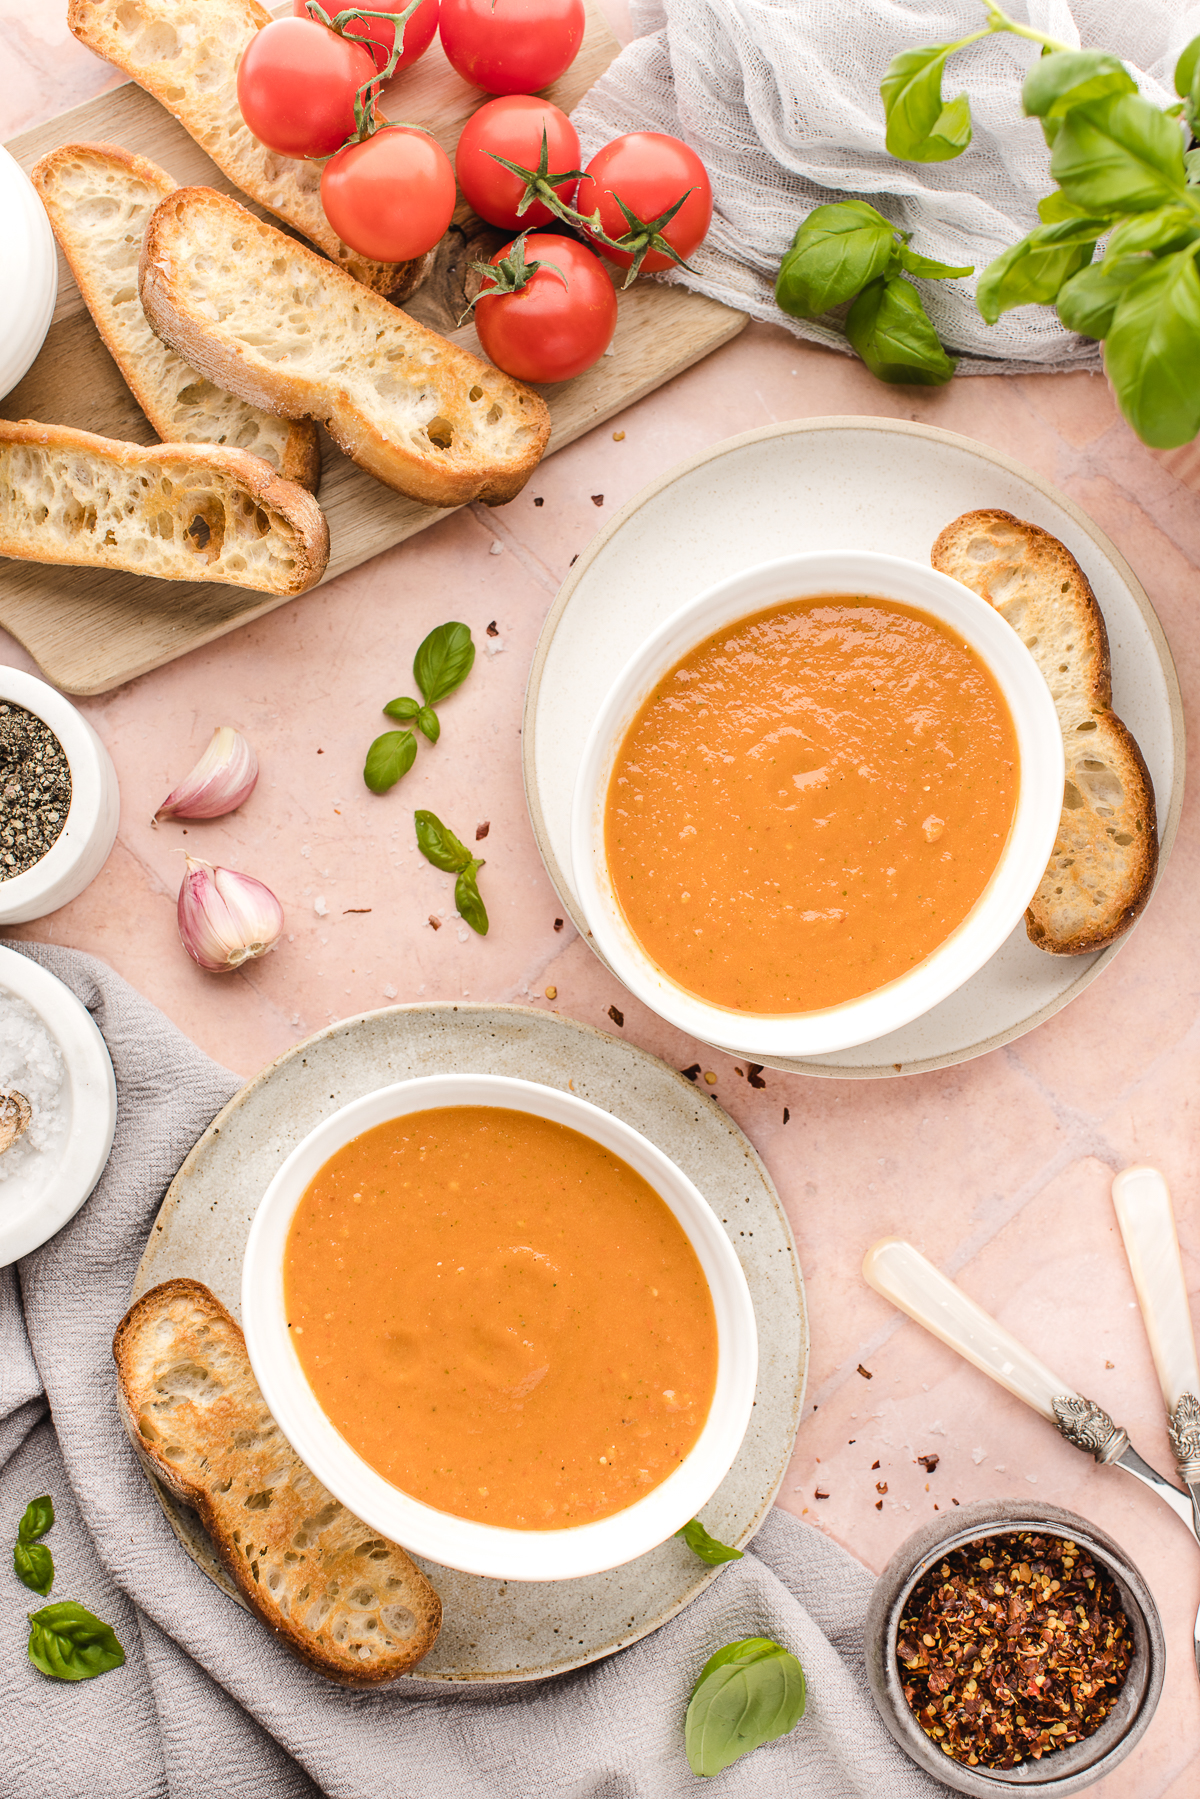 This easy roasted tomato soup recipe is healthy, hearty, and delicious - plus, it's affordable and simple to make! It's naturally vegan too!